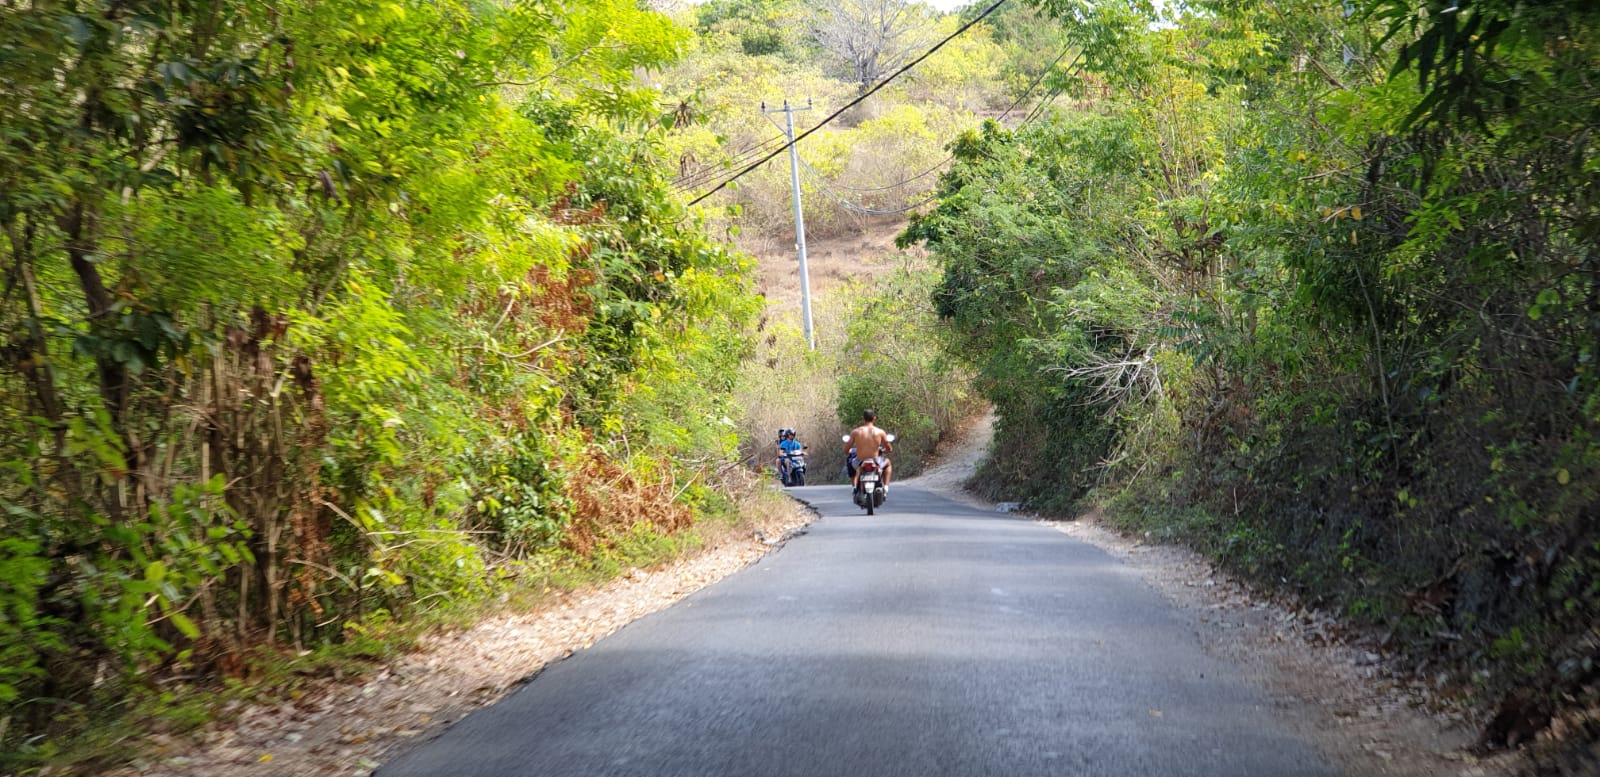 Scooter on the road in Nusa Penida